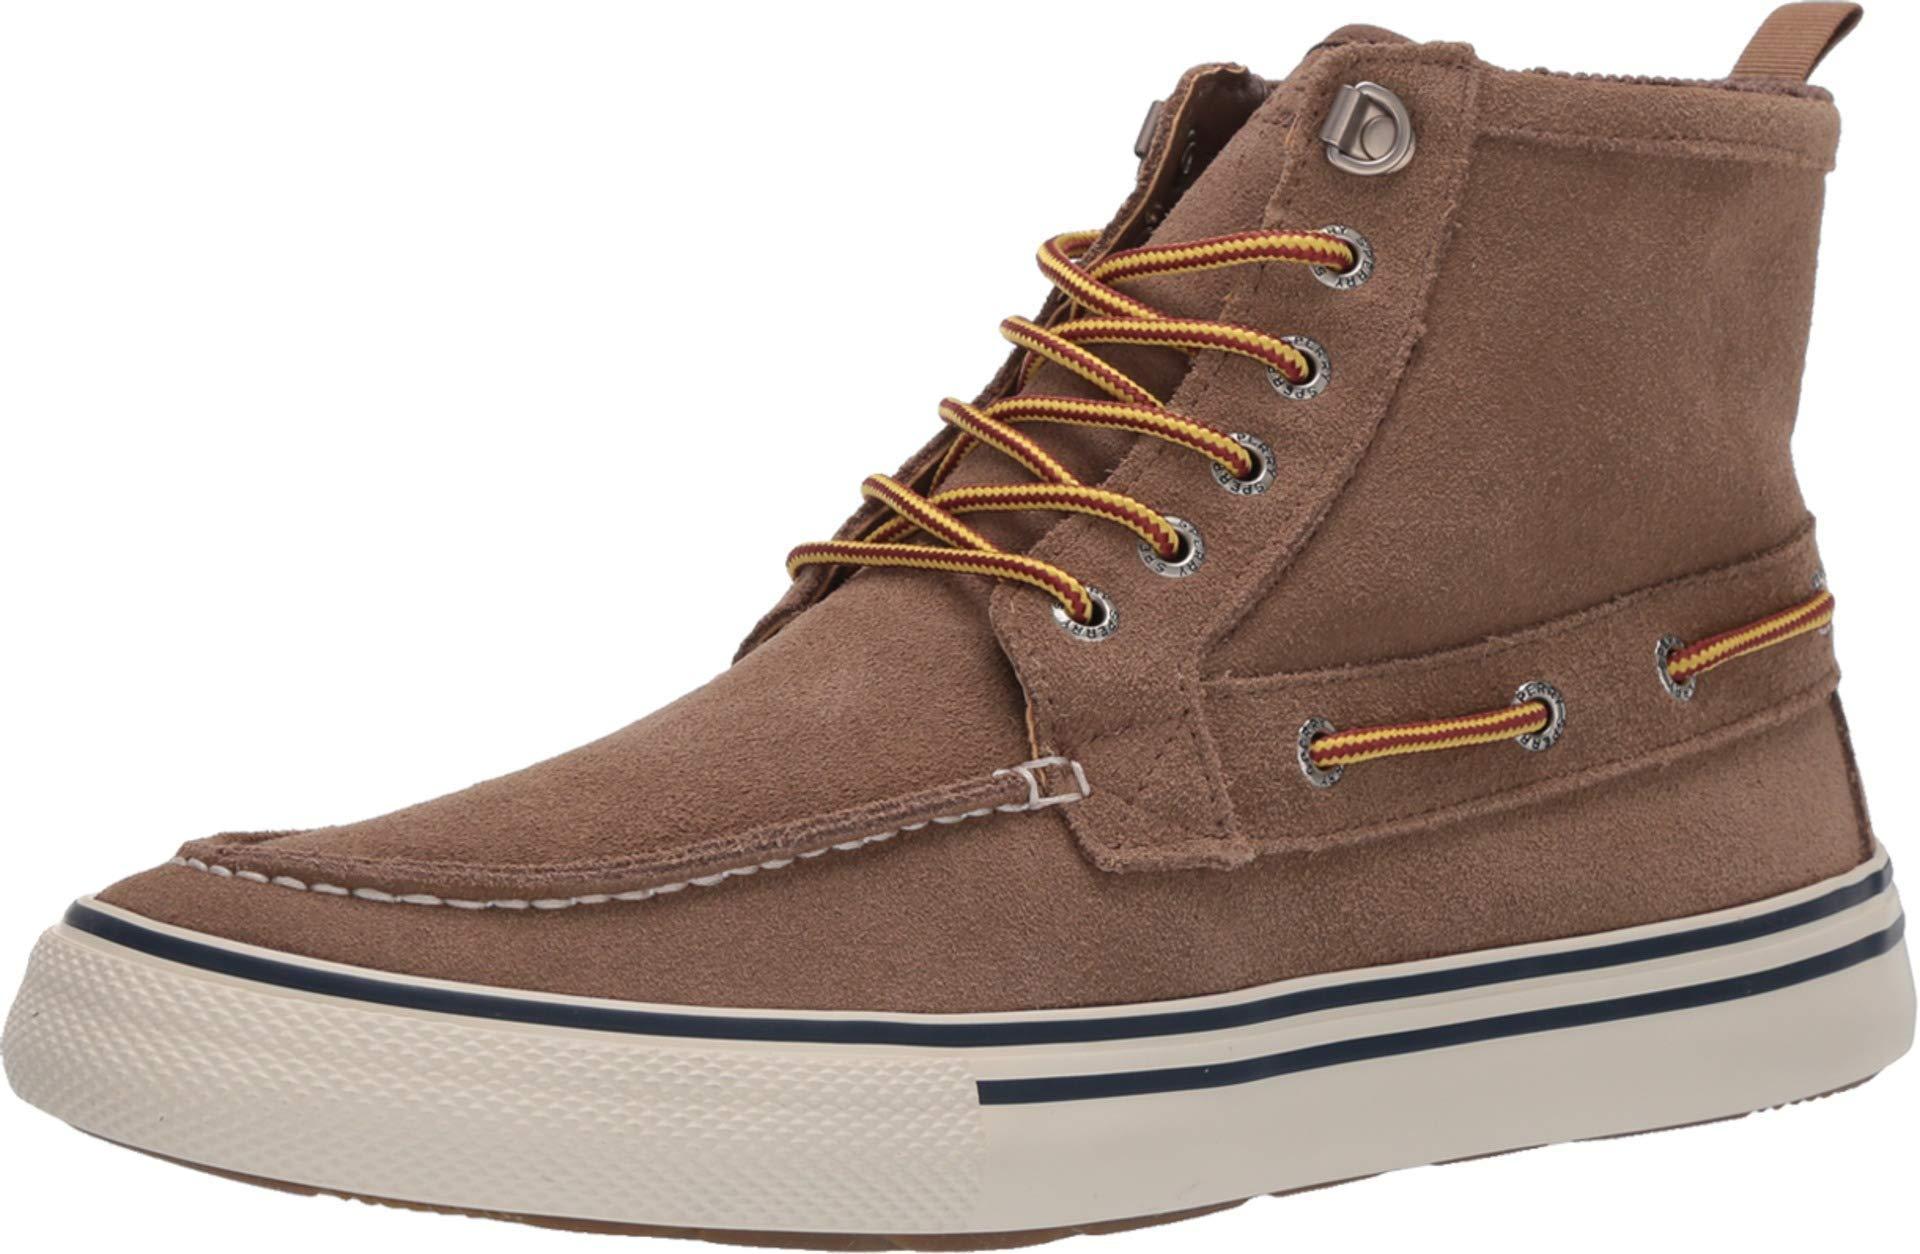 Sperry Top-Sider Suede Bahama Storm Boot in Tan Suede (Brown) for 